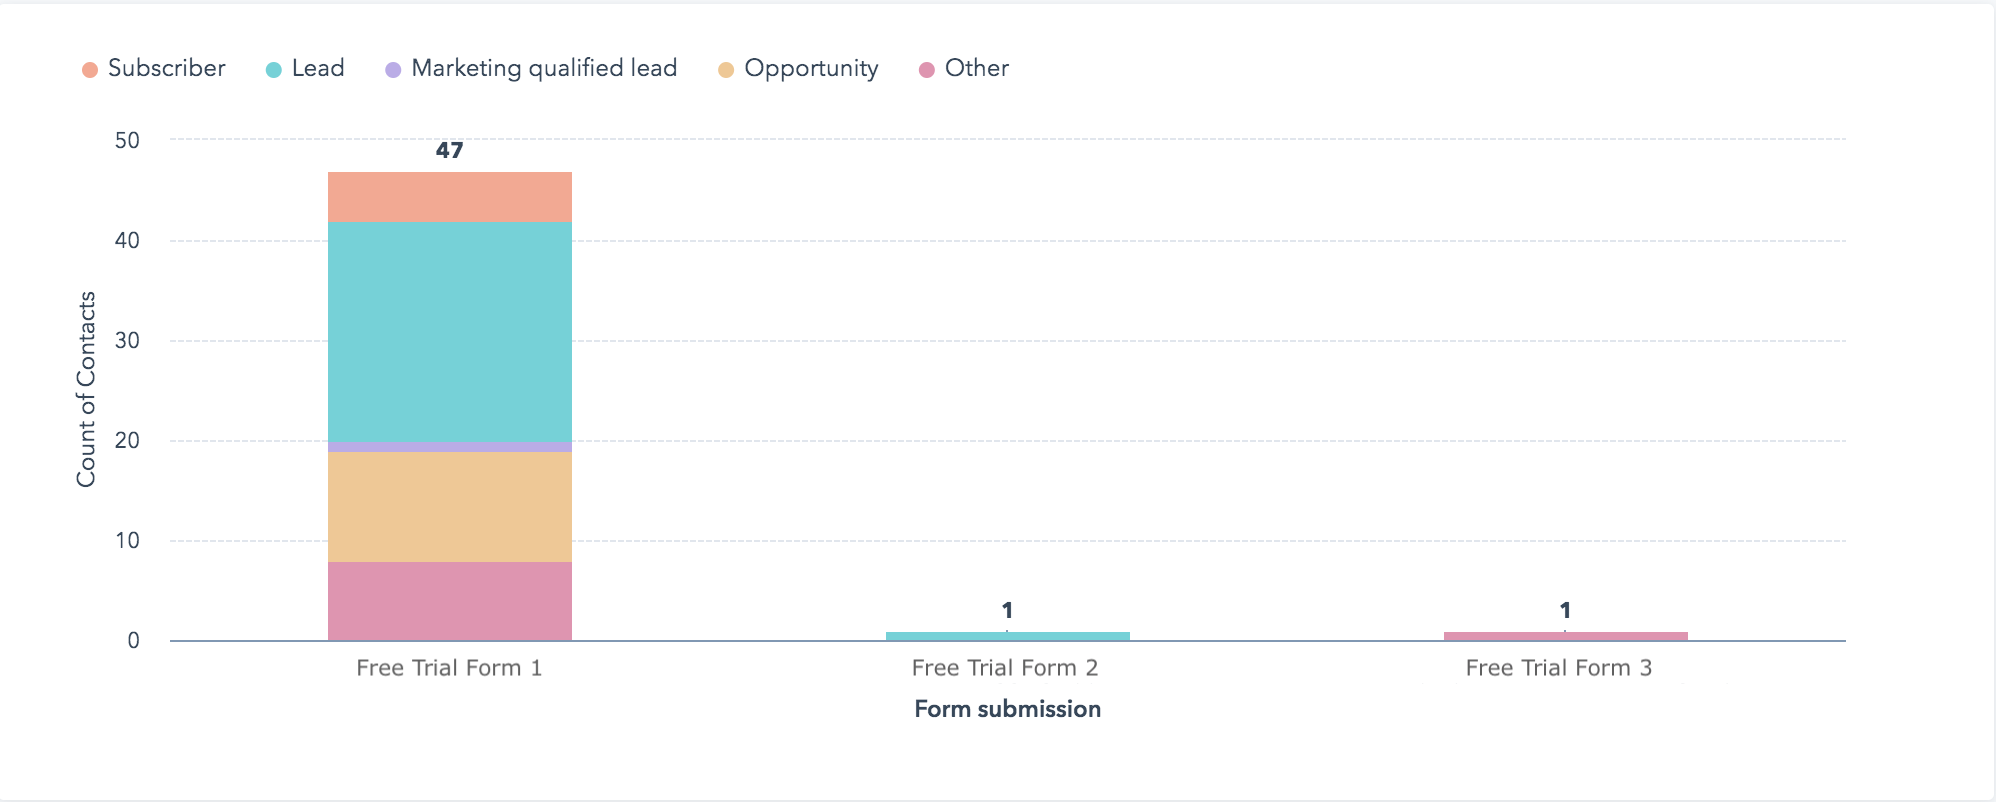 Free Trial to Paid Customer Custom Dashboard Report in HubSpot